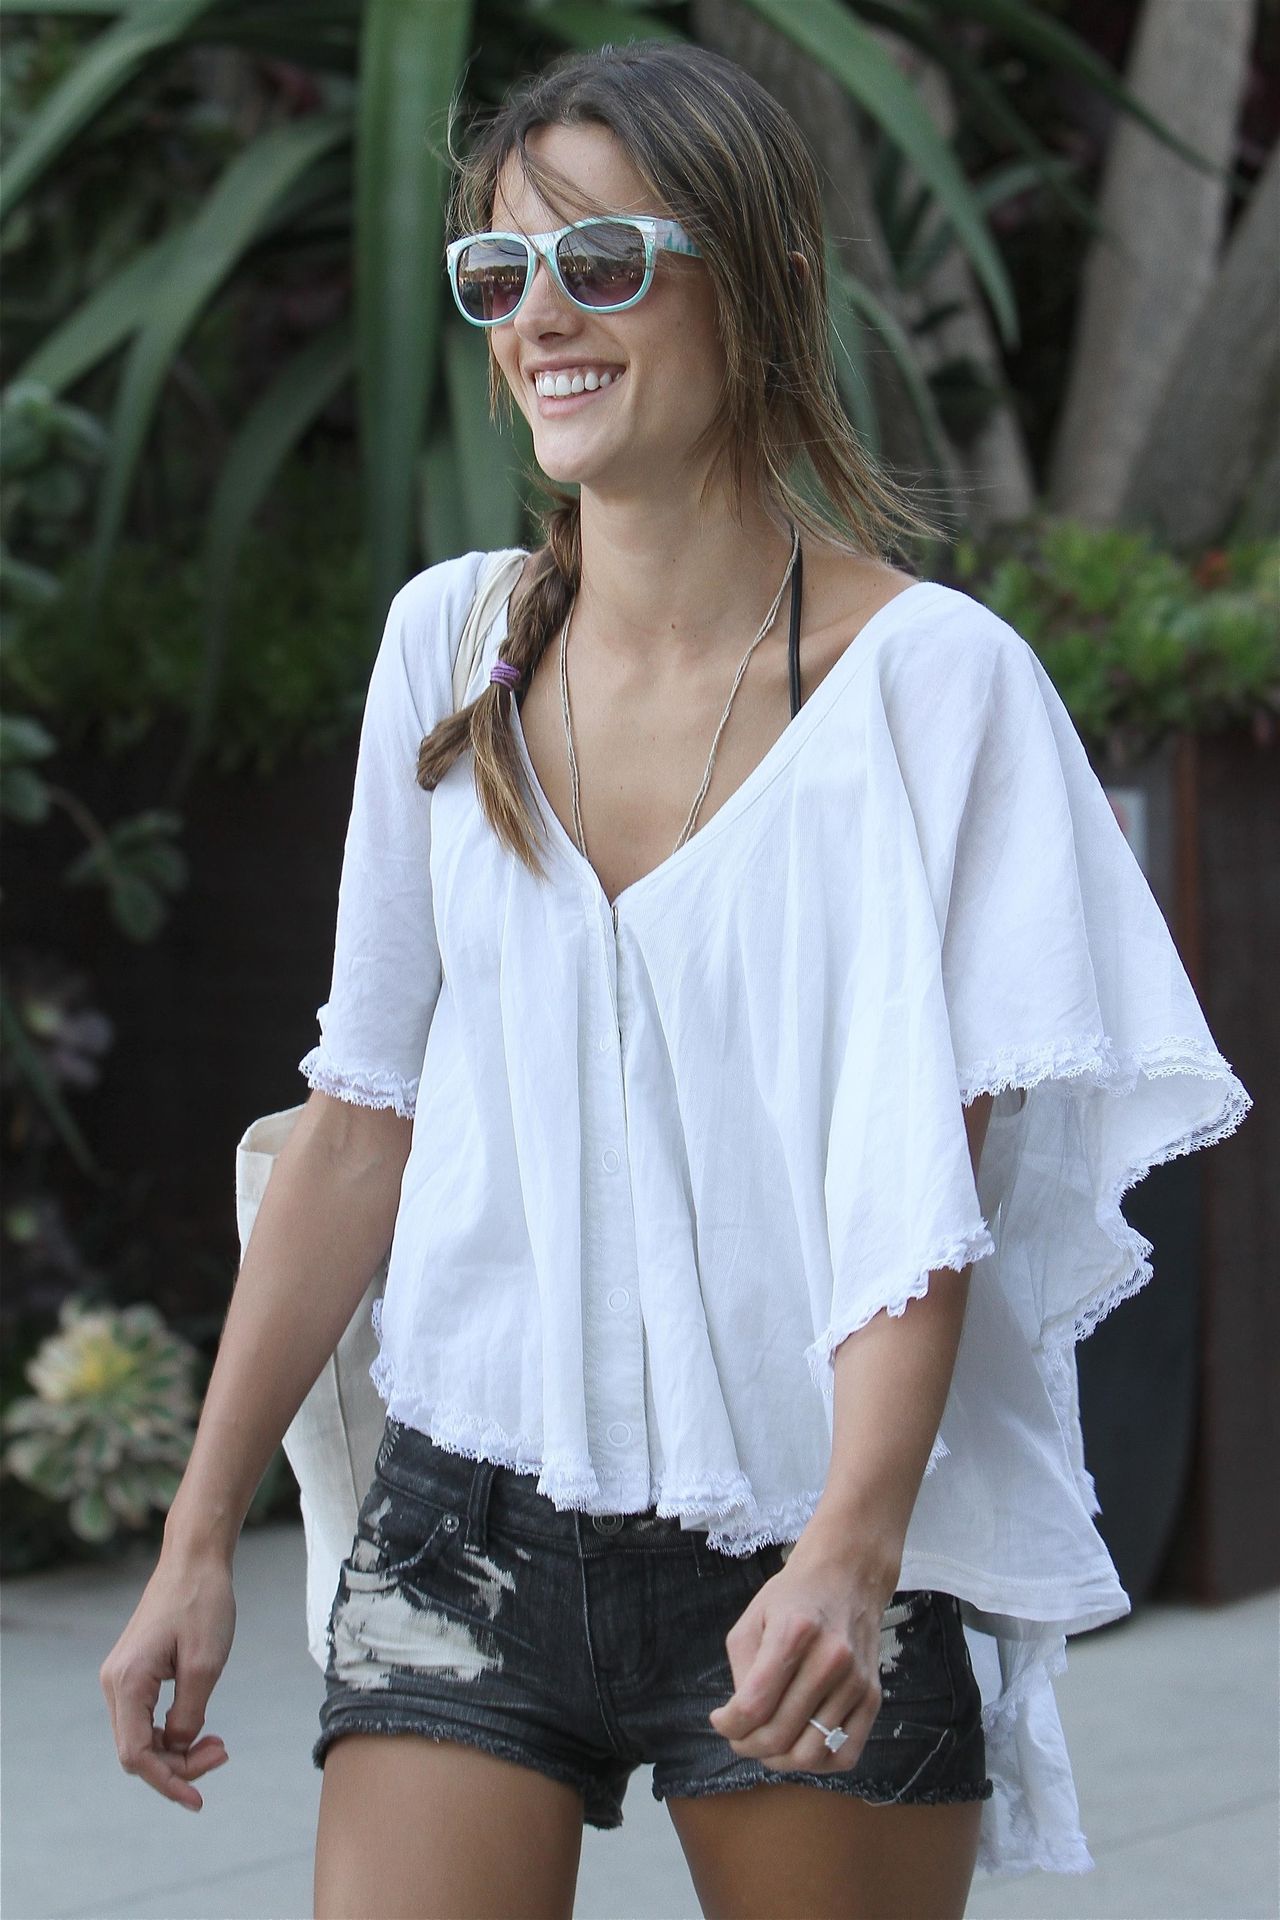 Alessandra Ambrosio Gets Some Shopping Done (29 Photos)